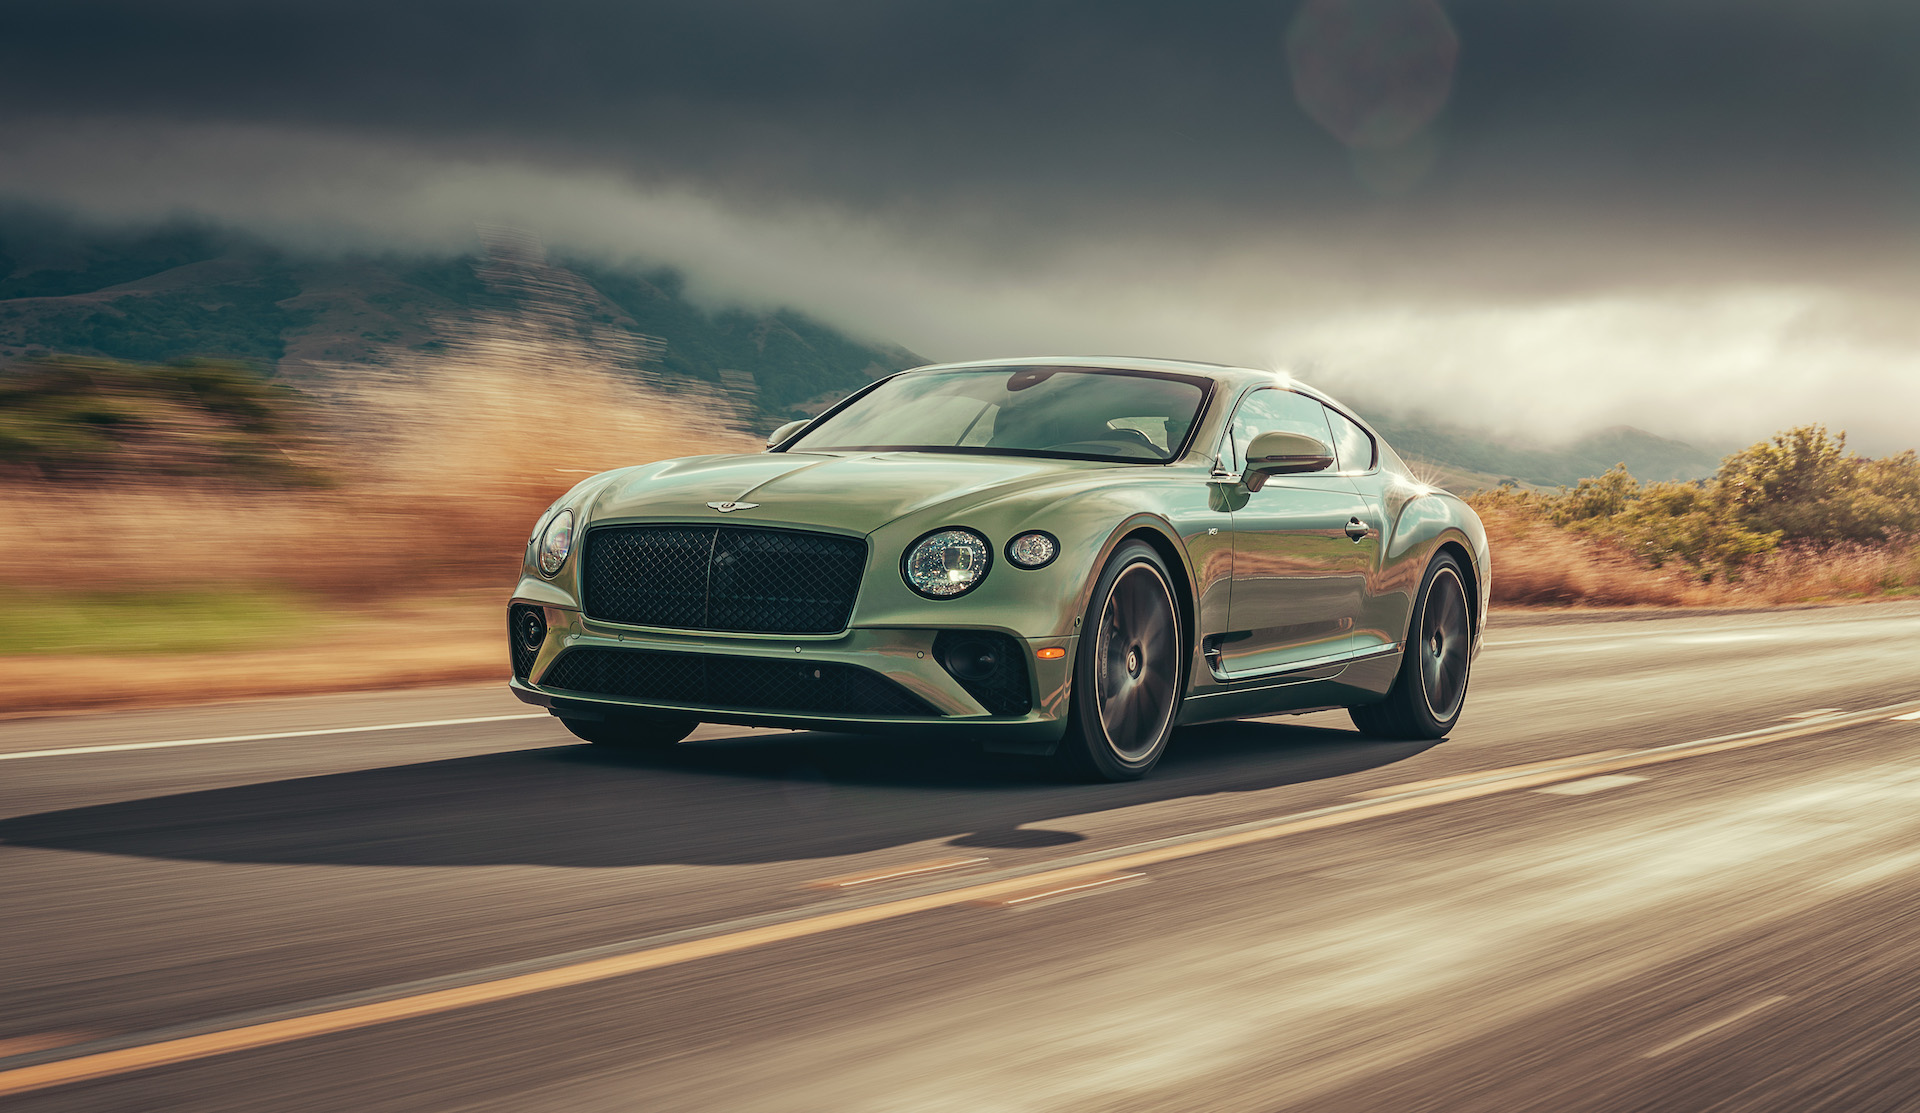 First drive review: Feeling good in the 2020 Bentley Continental GT V8